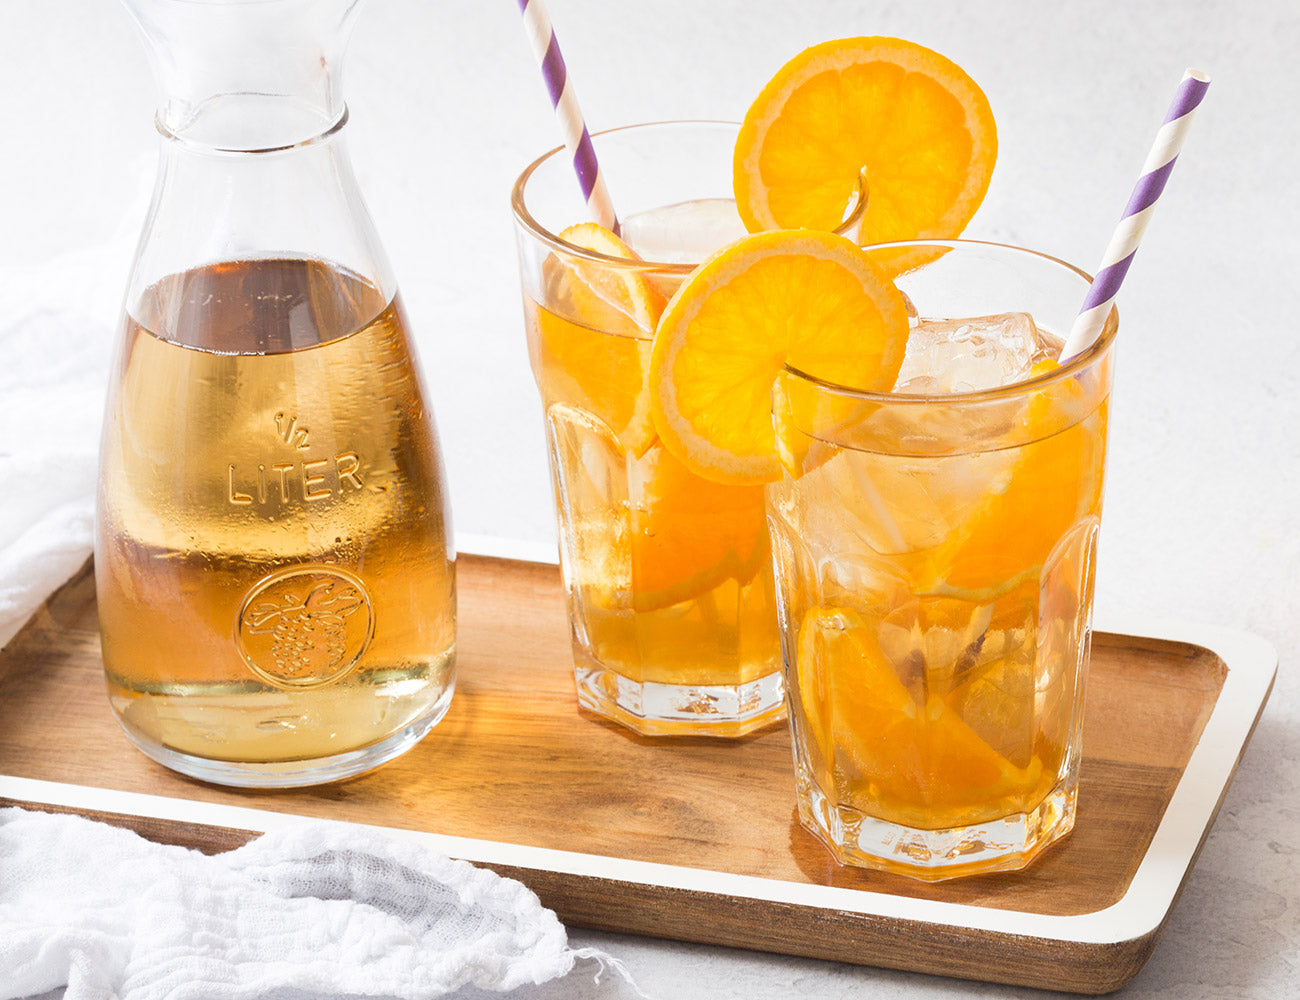 Ice tea makers that will refresh you on hot days